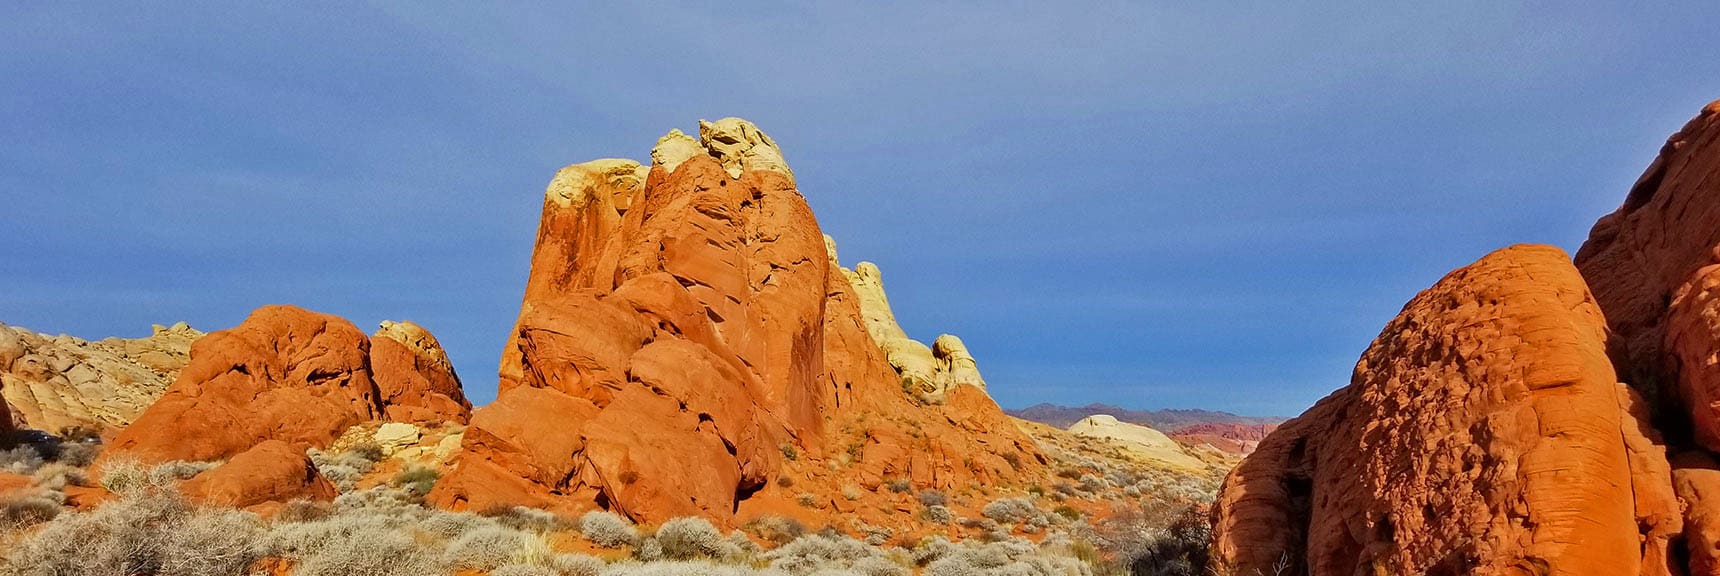 Rock Formations Along Rainbow Vista Trail in Valley of Fire State Park, Nevada